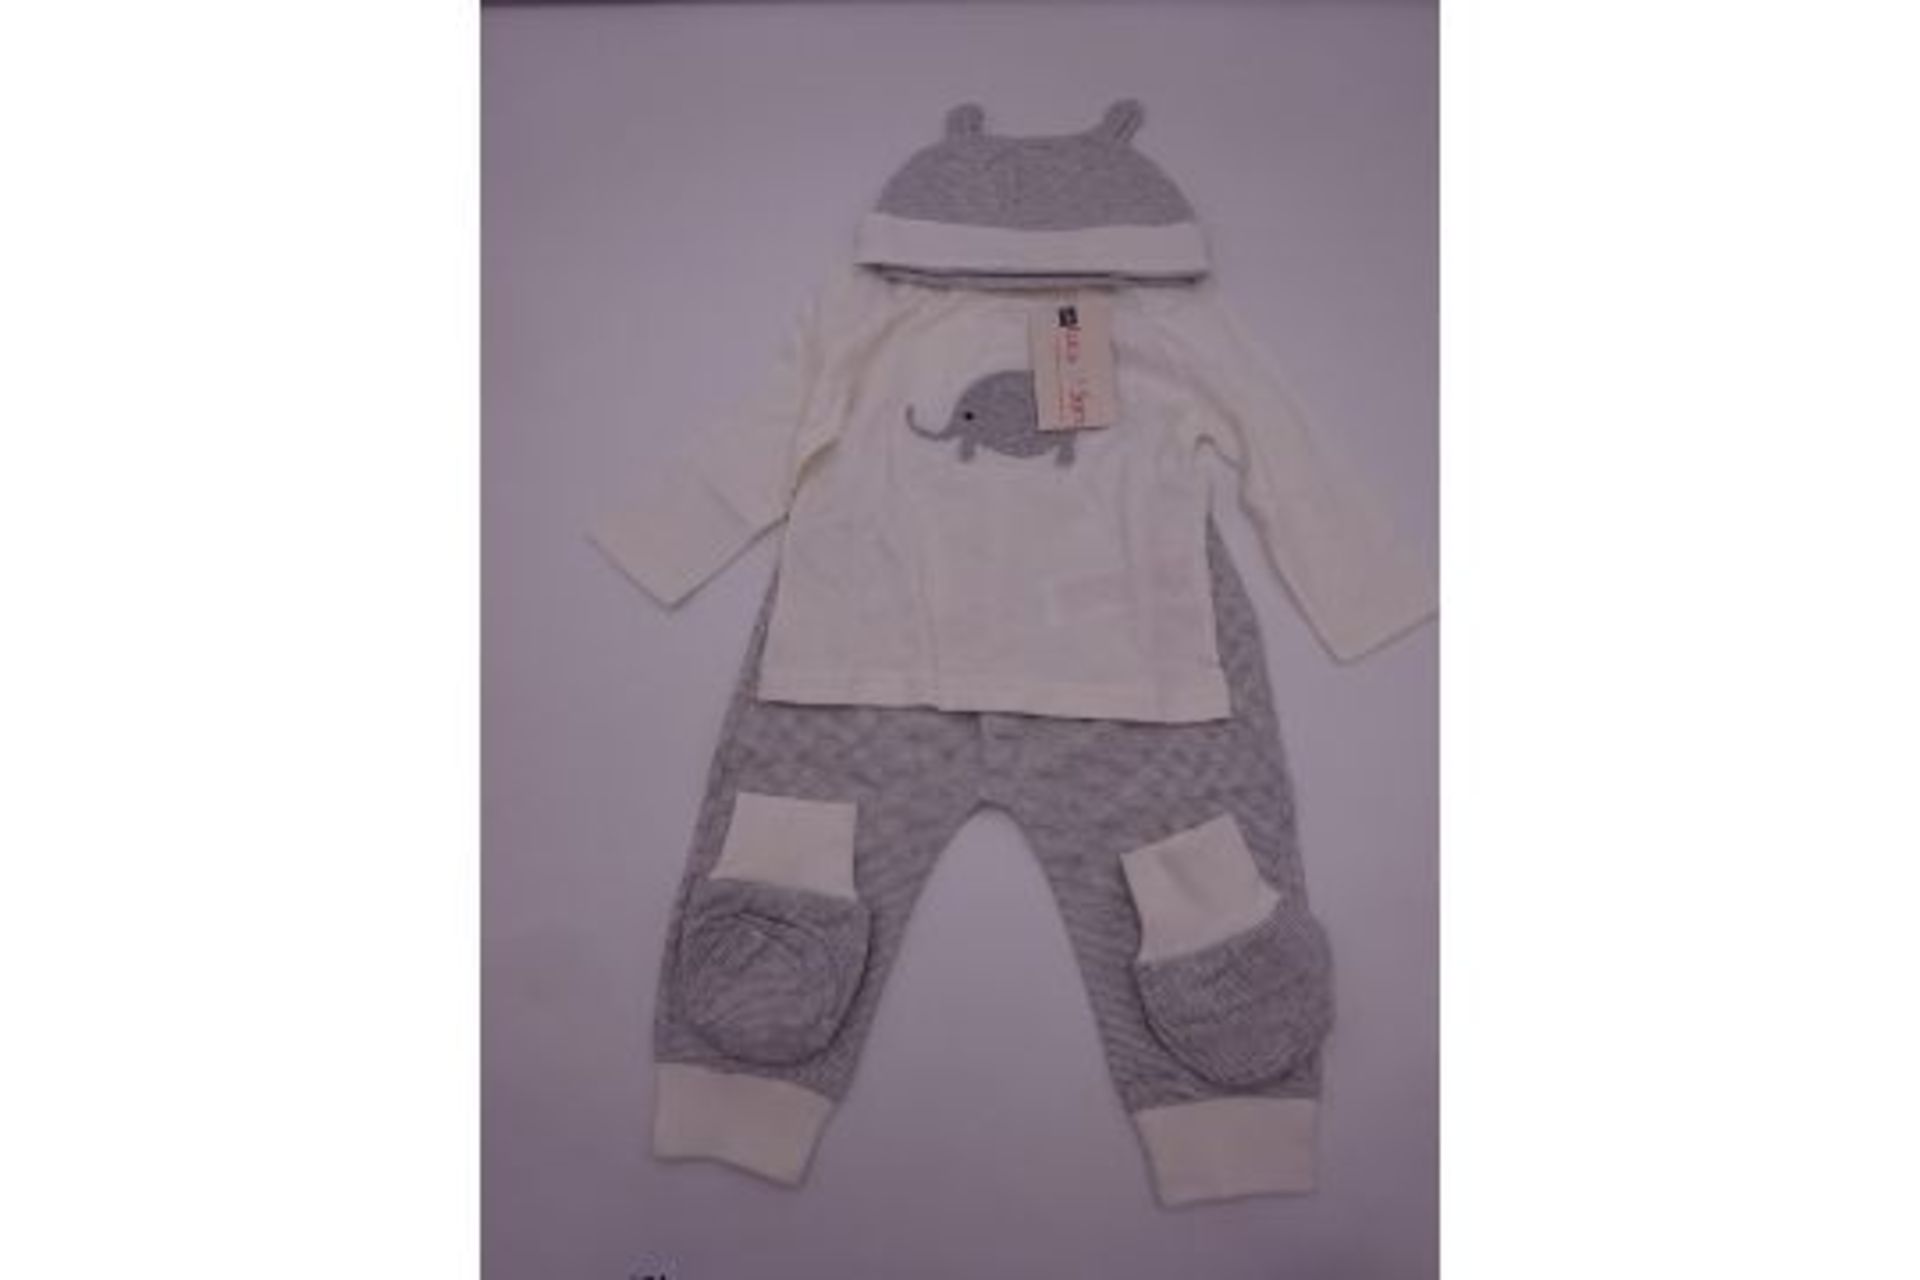 Elpant Babys Gift Set (12 to 18 months) - RRP £55.